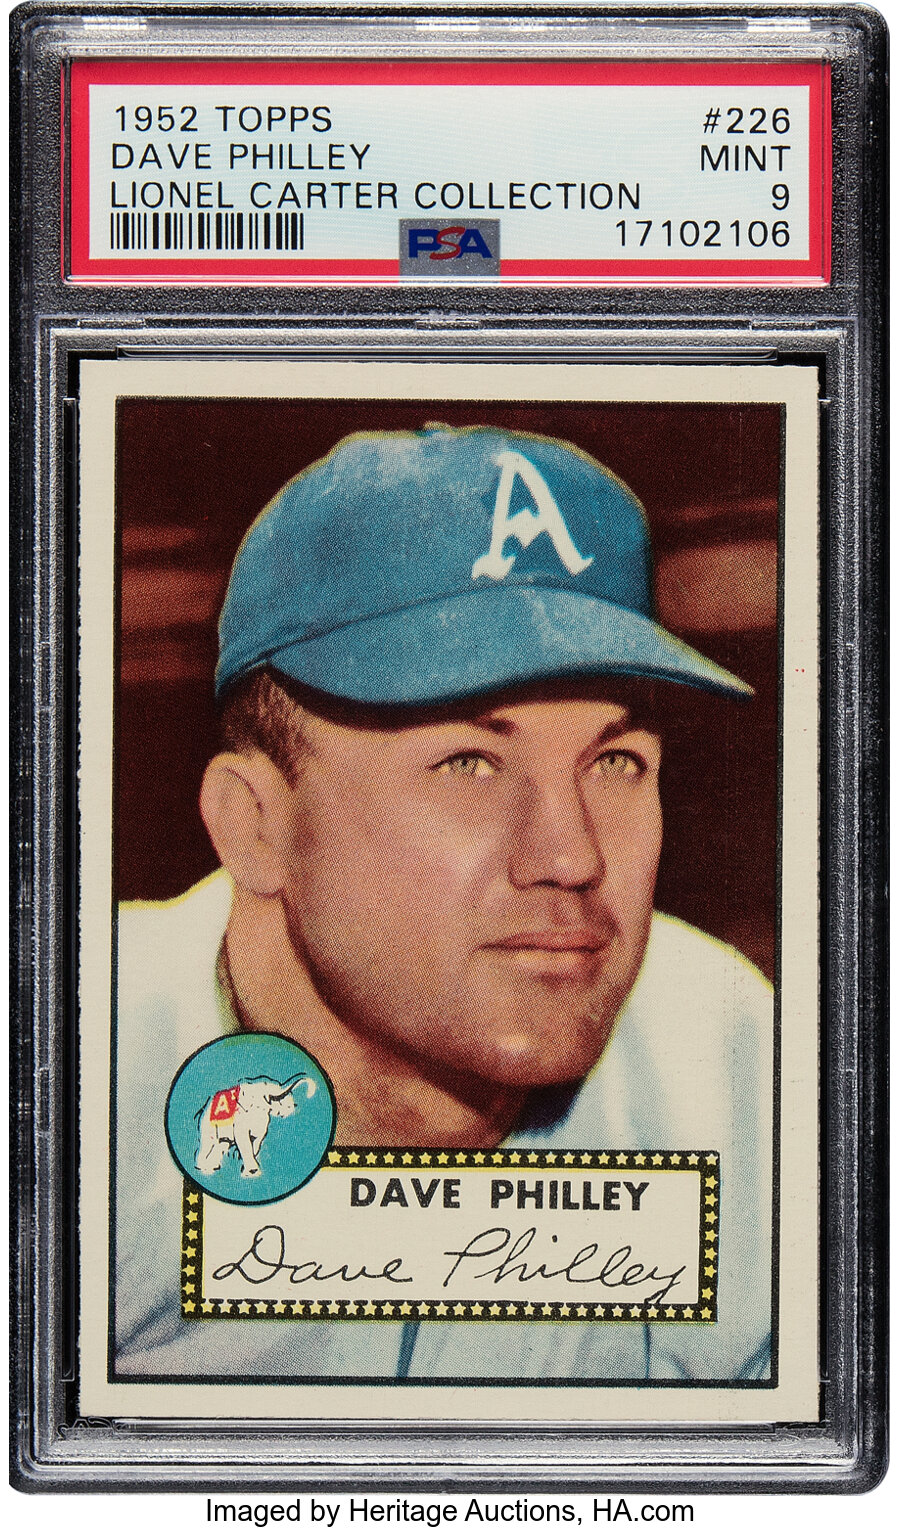 1952 Topps Dave Philley #226 PSA Mint 9 - Pop Five, None Superior! From the Lionel Carter Collection